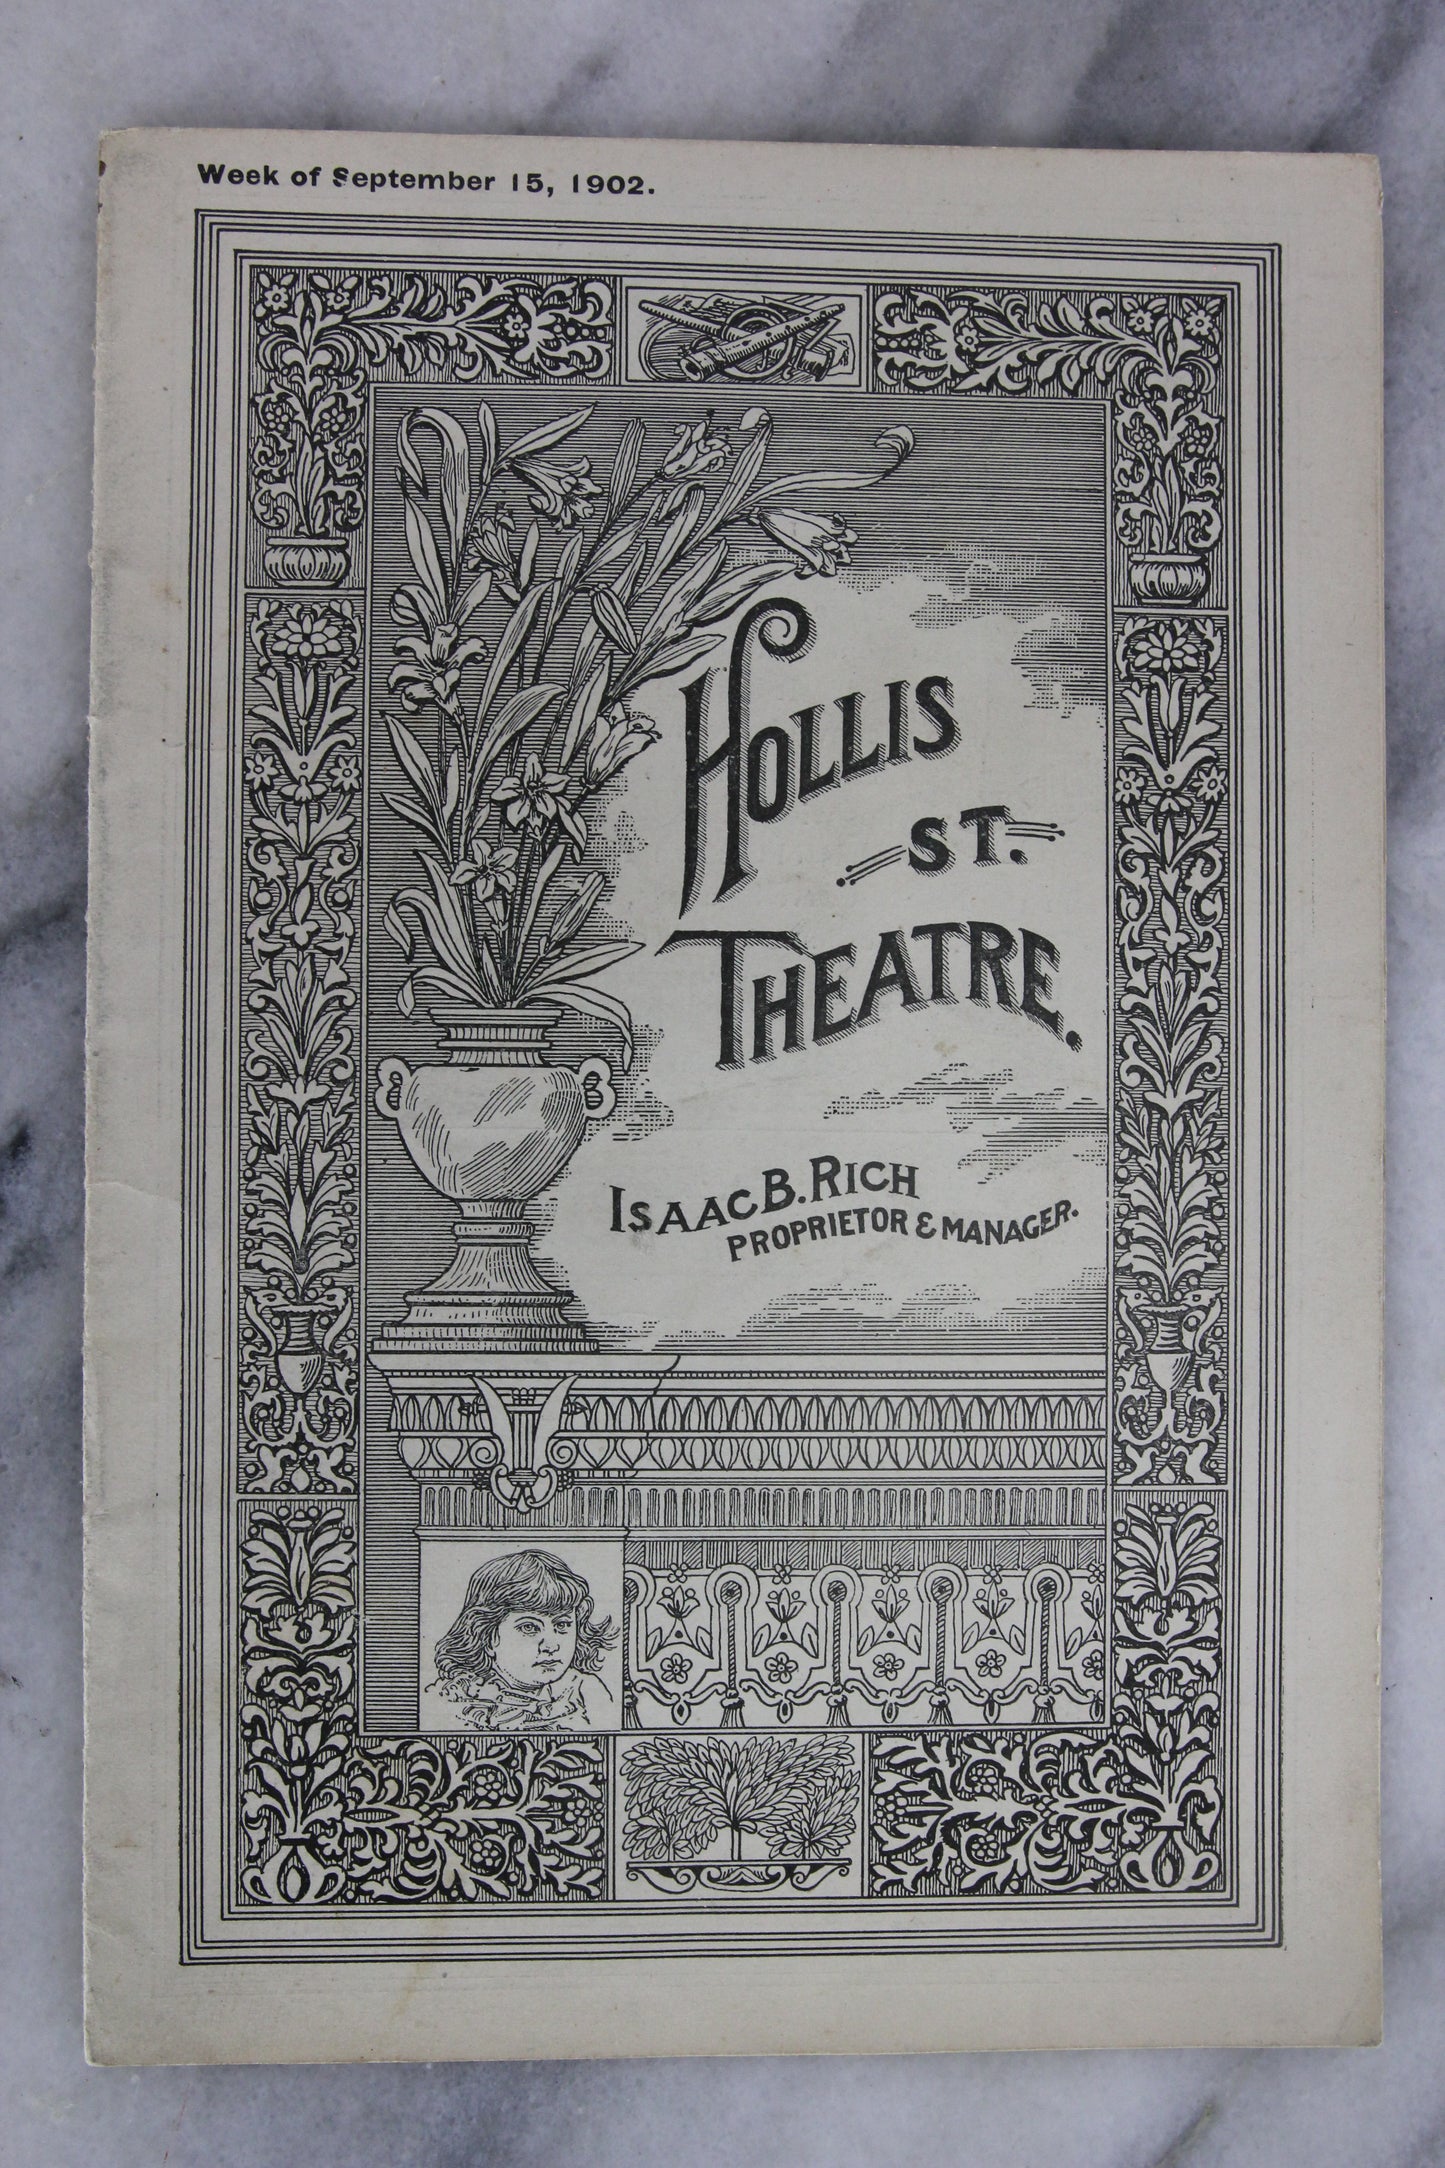 Antique Playbill from Hollis St. Theatre, Boston, Week of September 15, 1902